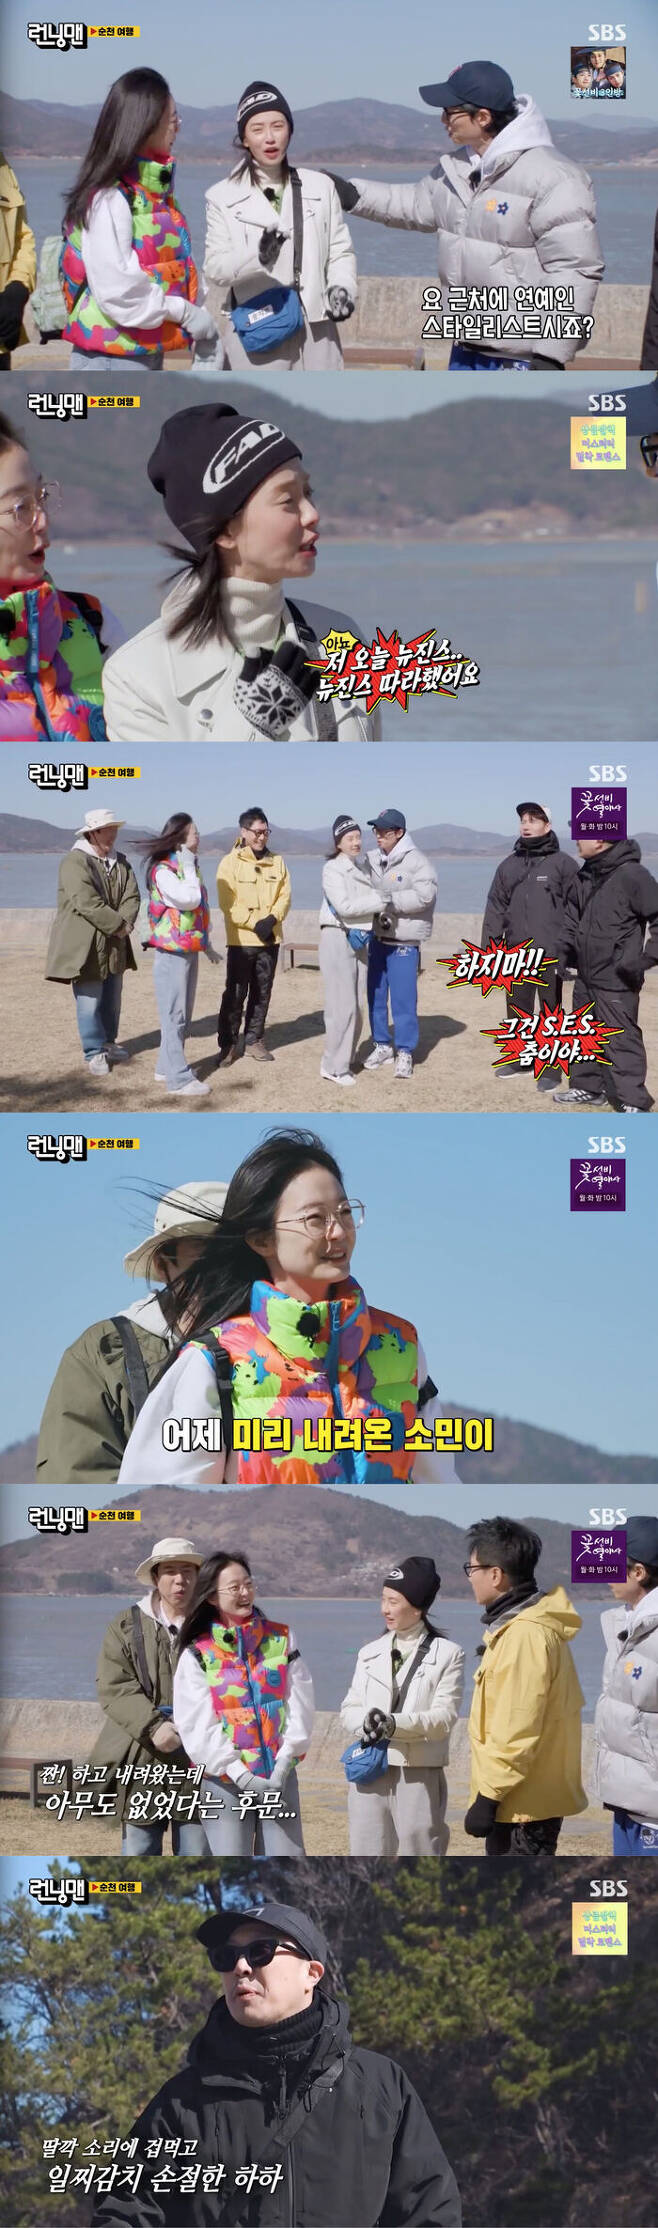 Yoo Jae-suk disassembled Song Ji-hyos costume.In SBS Running Man broadcast on the 26th, Suncheon scabbard camping race was held.On this day, Yoo Jae-Suk watched Song Ji-hyo and said, Are you a celebrity stylist near you?Song Ji-hyo began to dance, saying, No, I did it with New Jinx today. Members said, Thats not it.Its S.E.S dance, he said, drying Song Ji-hyo and laughing, Its not New Jinx, its progressive. In addition, Yoo Jae-suk mentioned Jeon So-min, who came down a day earlier, and said, Usually, when some of the directors come down first, So-min comes in advance and has a drink. But I came alone more than I thought.Jeon So-min said, There was no one really. But Haha arrived late. So I contacted my brother and he said, Uh, Im going to sleep.Haha laughed, confessing that he pretended to sleep to avoid drinking, saying, Actually, I heard the sound of picking a can beer.